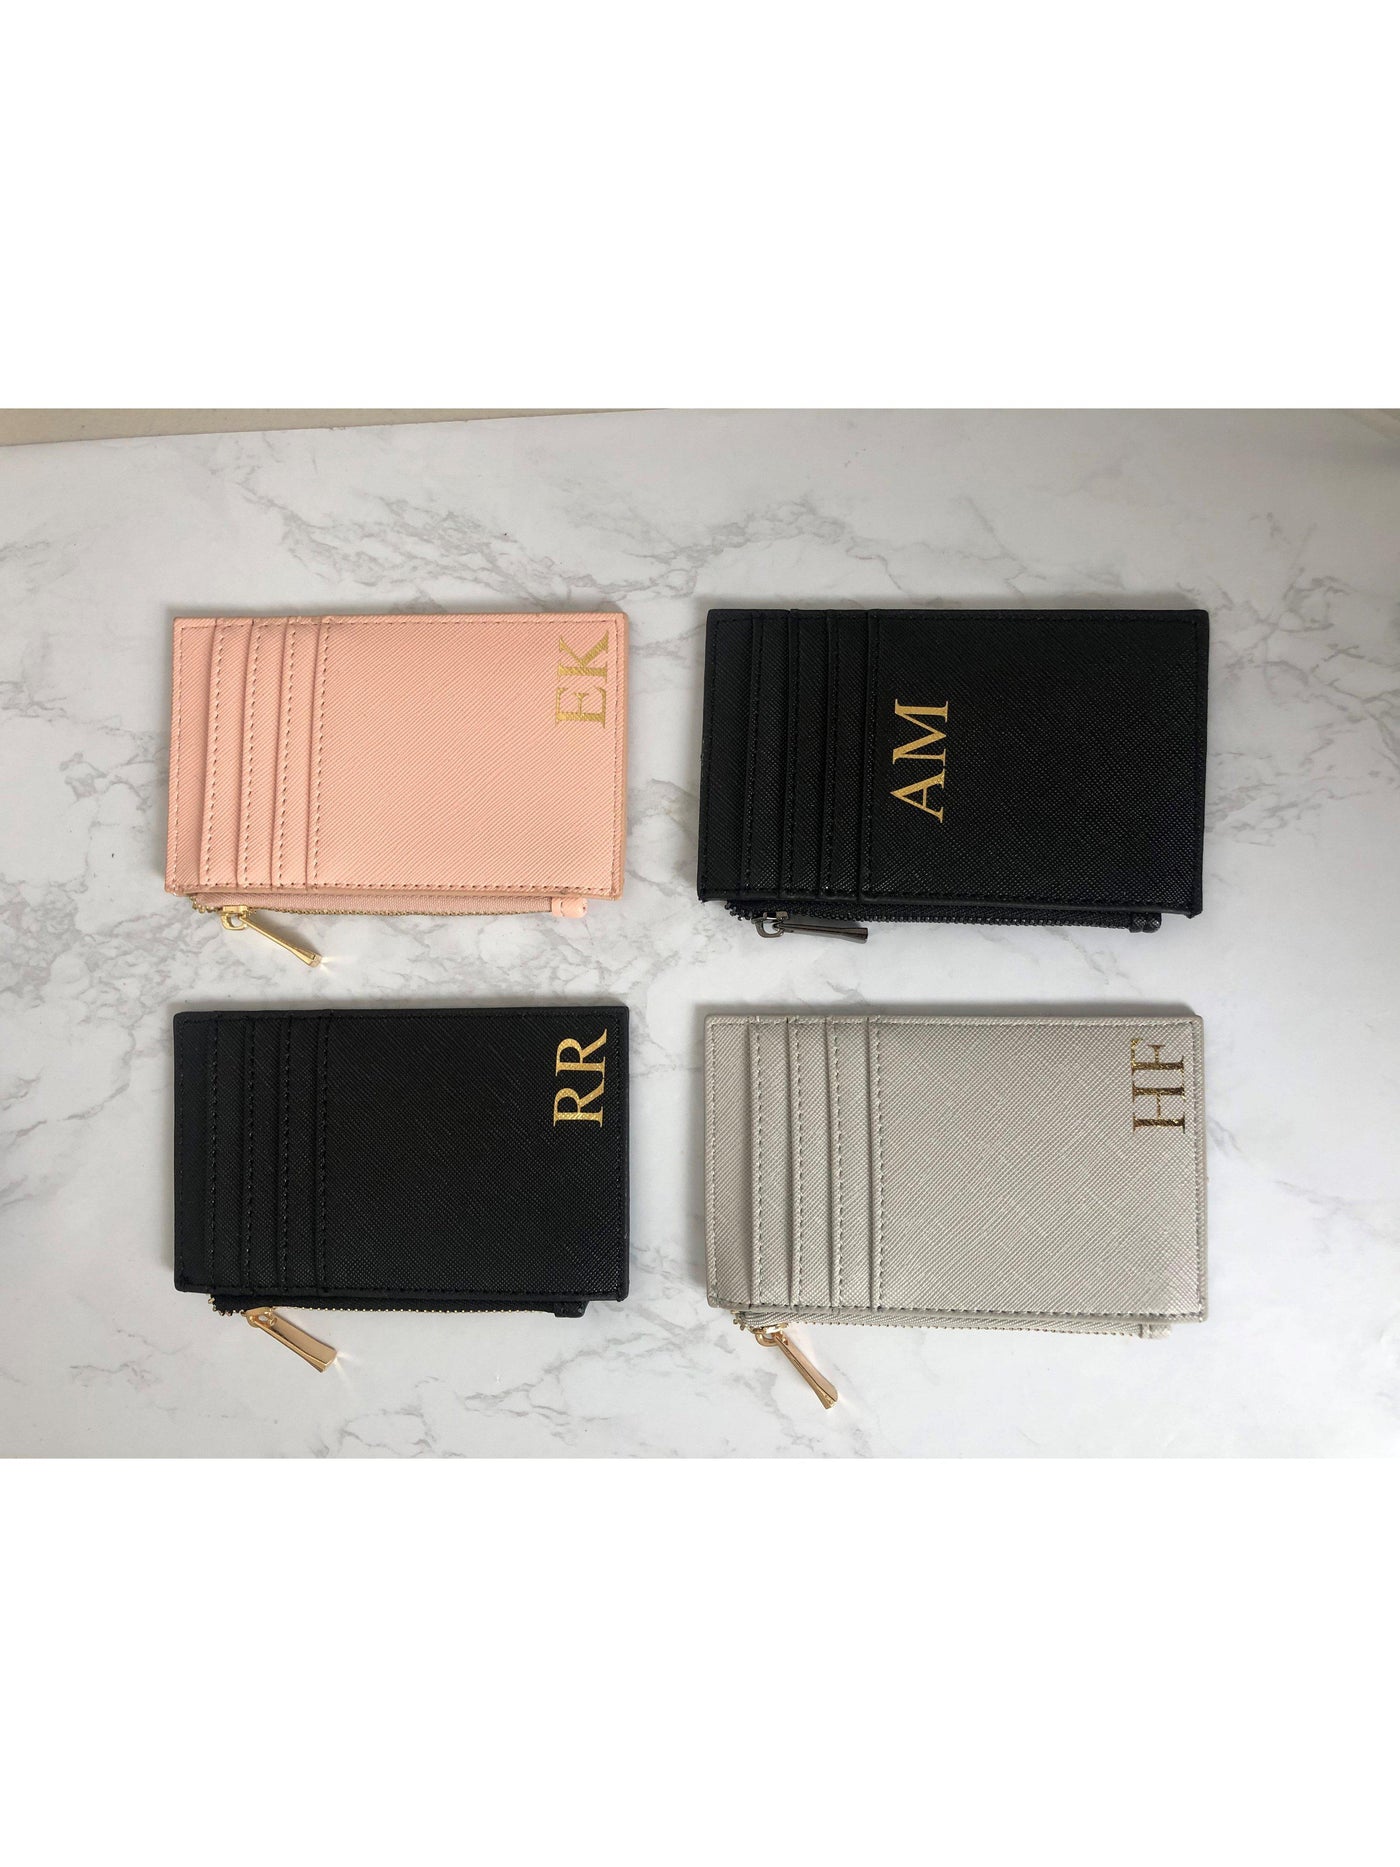 Personalised wallet with gold foil monogram